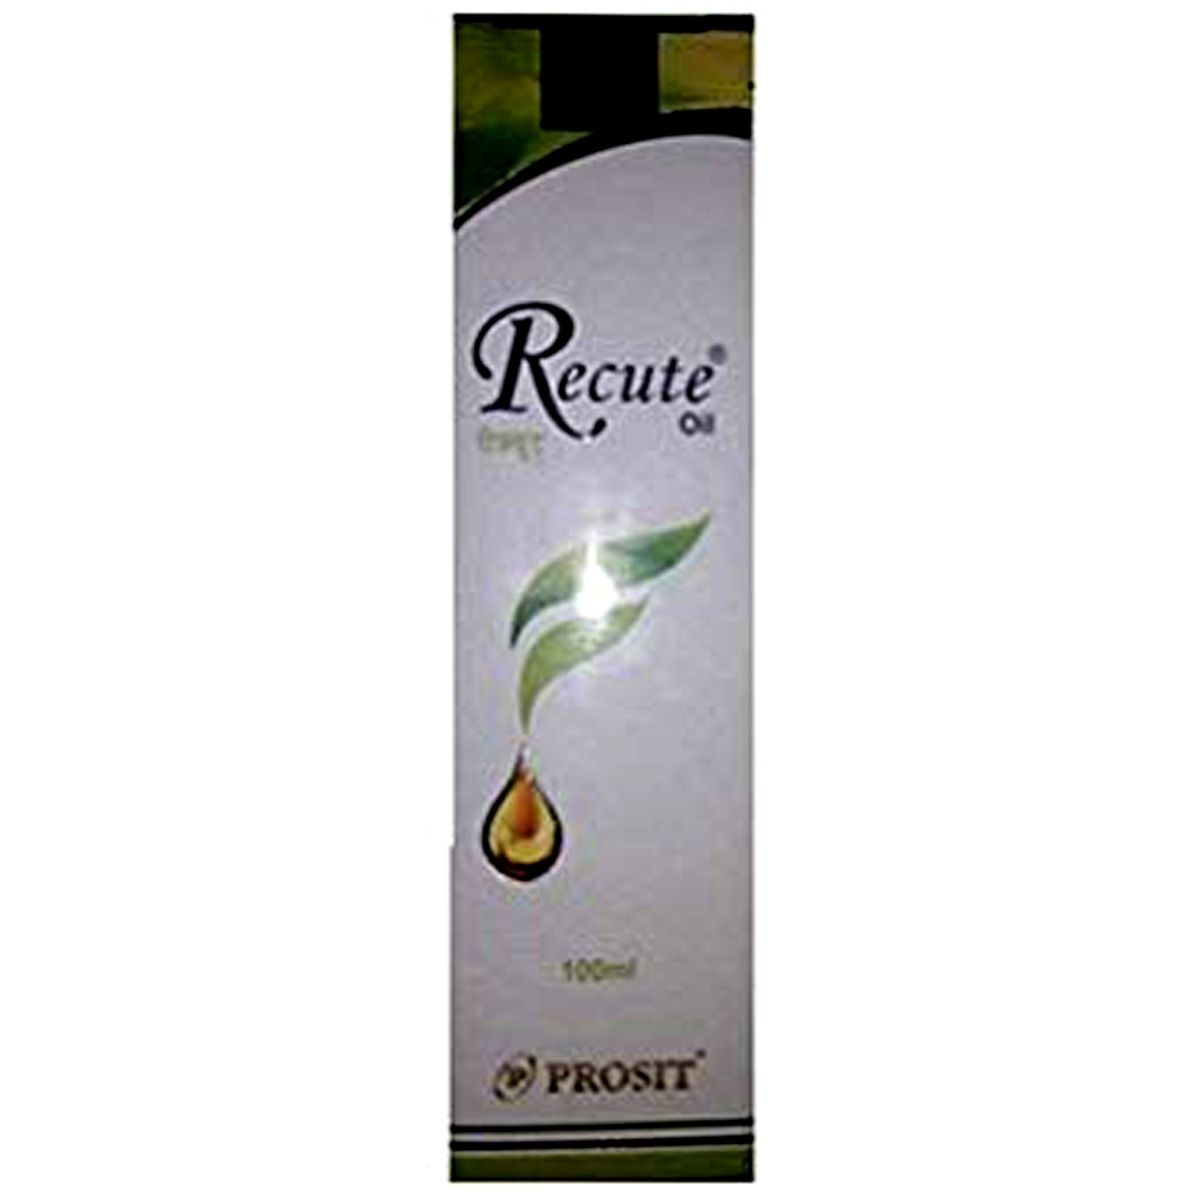 Recute Hair Oil, 100 ml Price, Uses, Side Effects, Composition - Apollo  Pharmacy